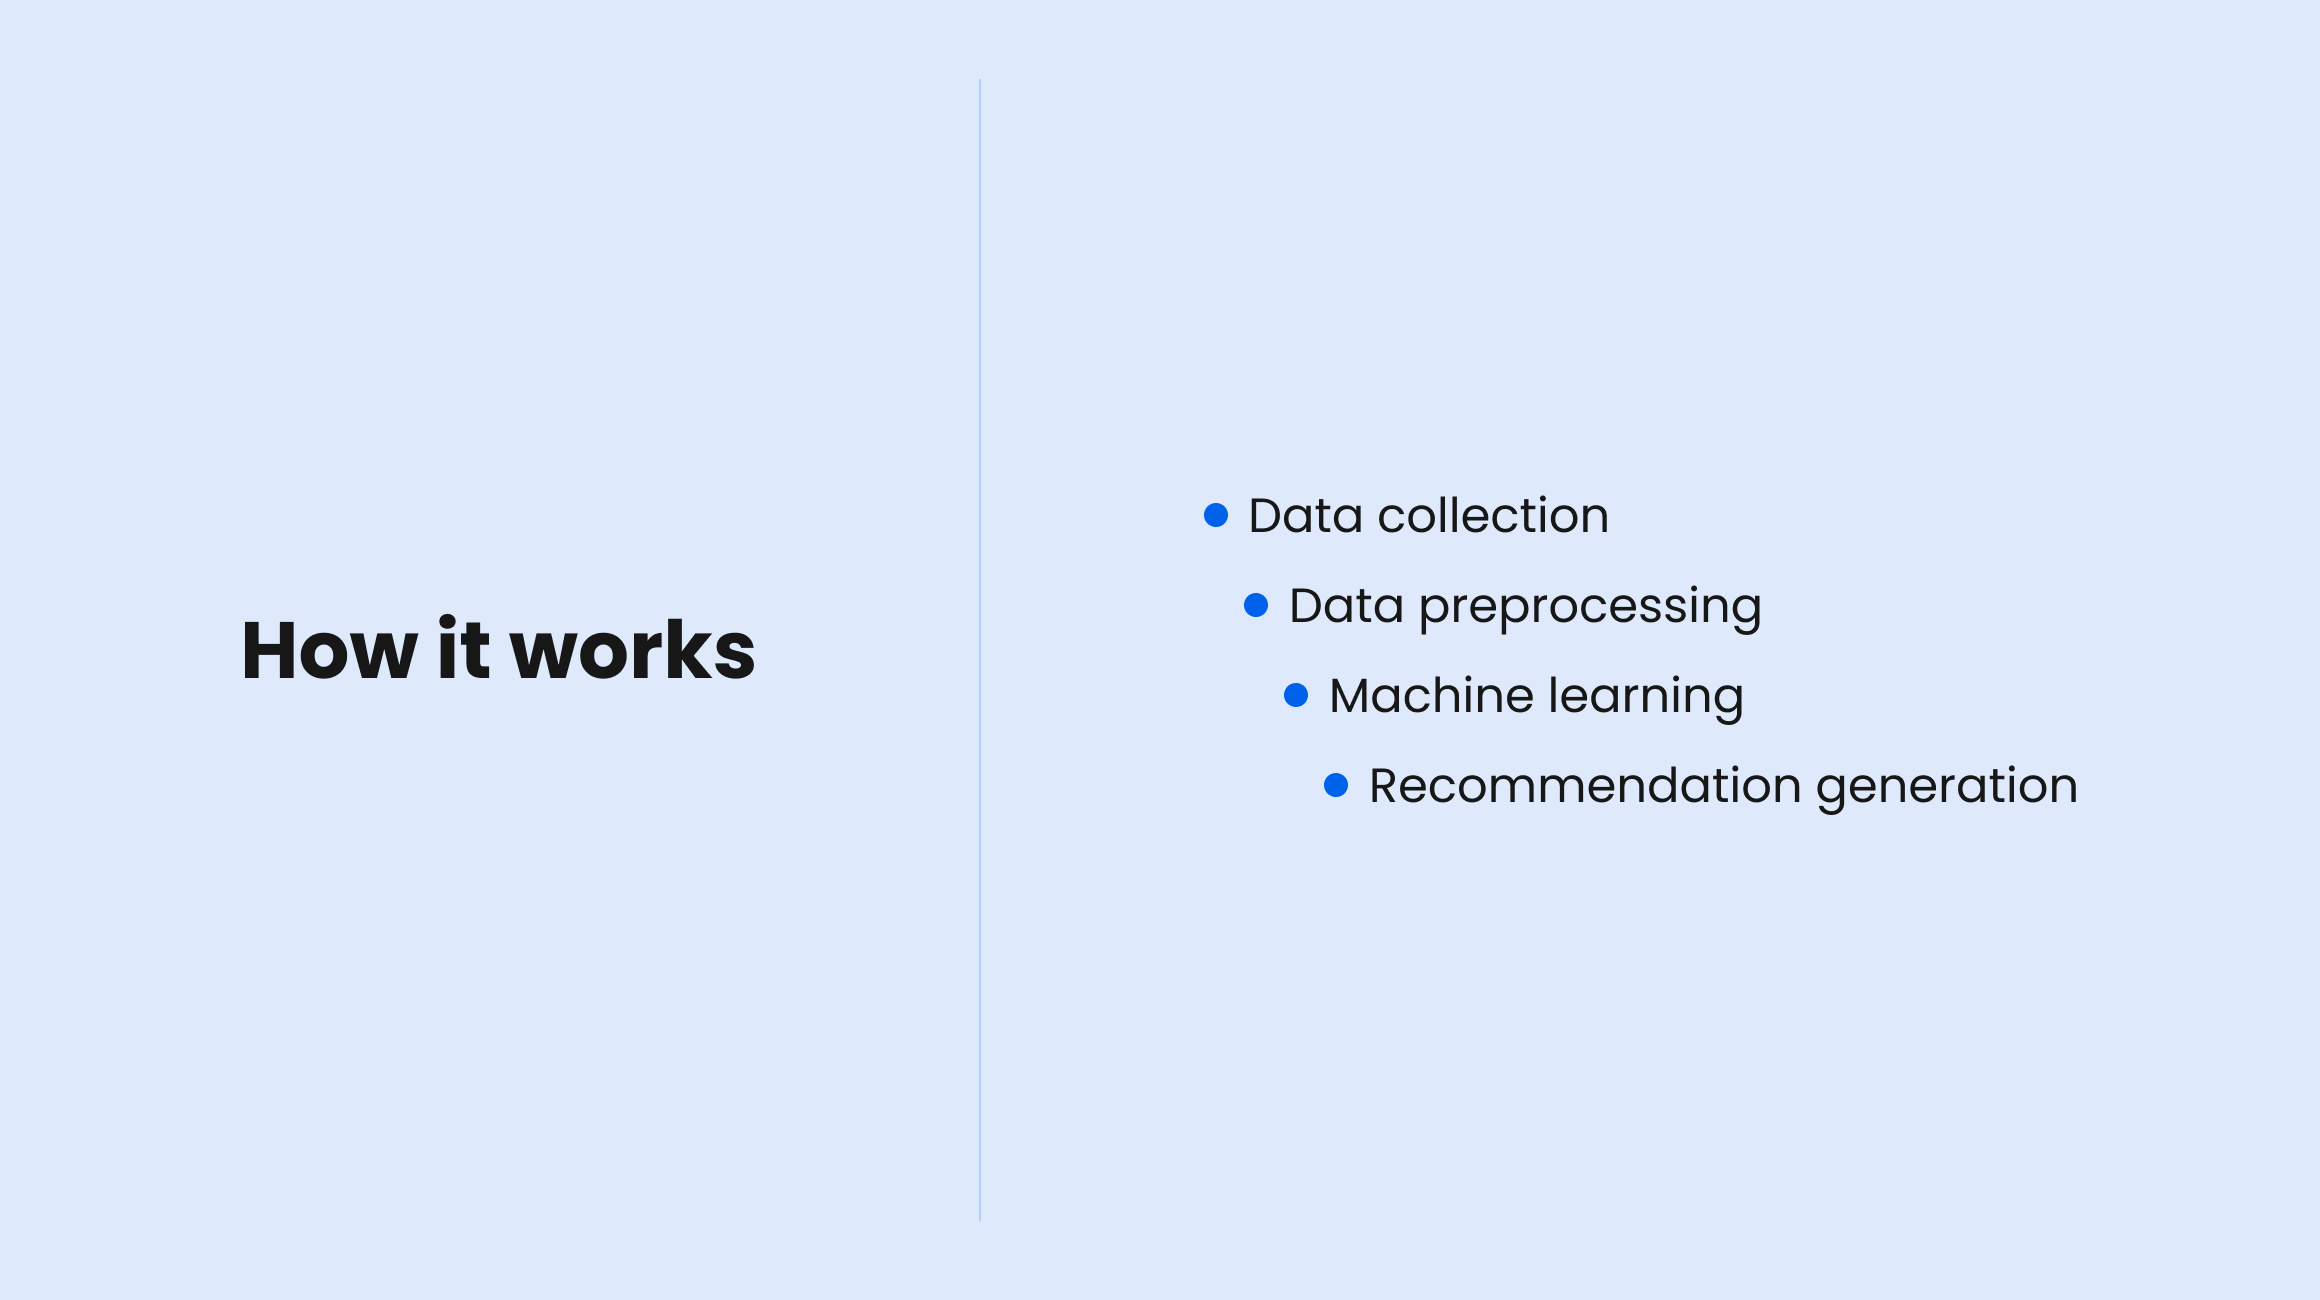 How recommender systems work